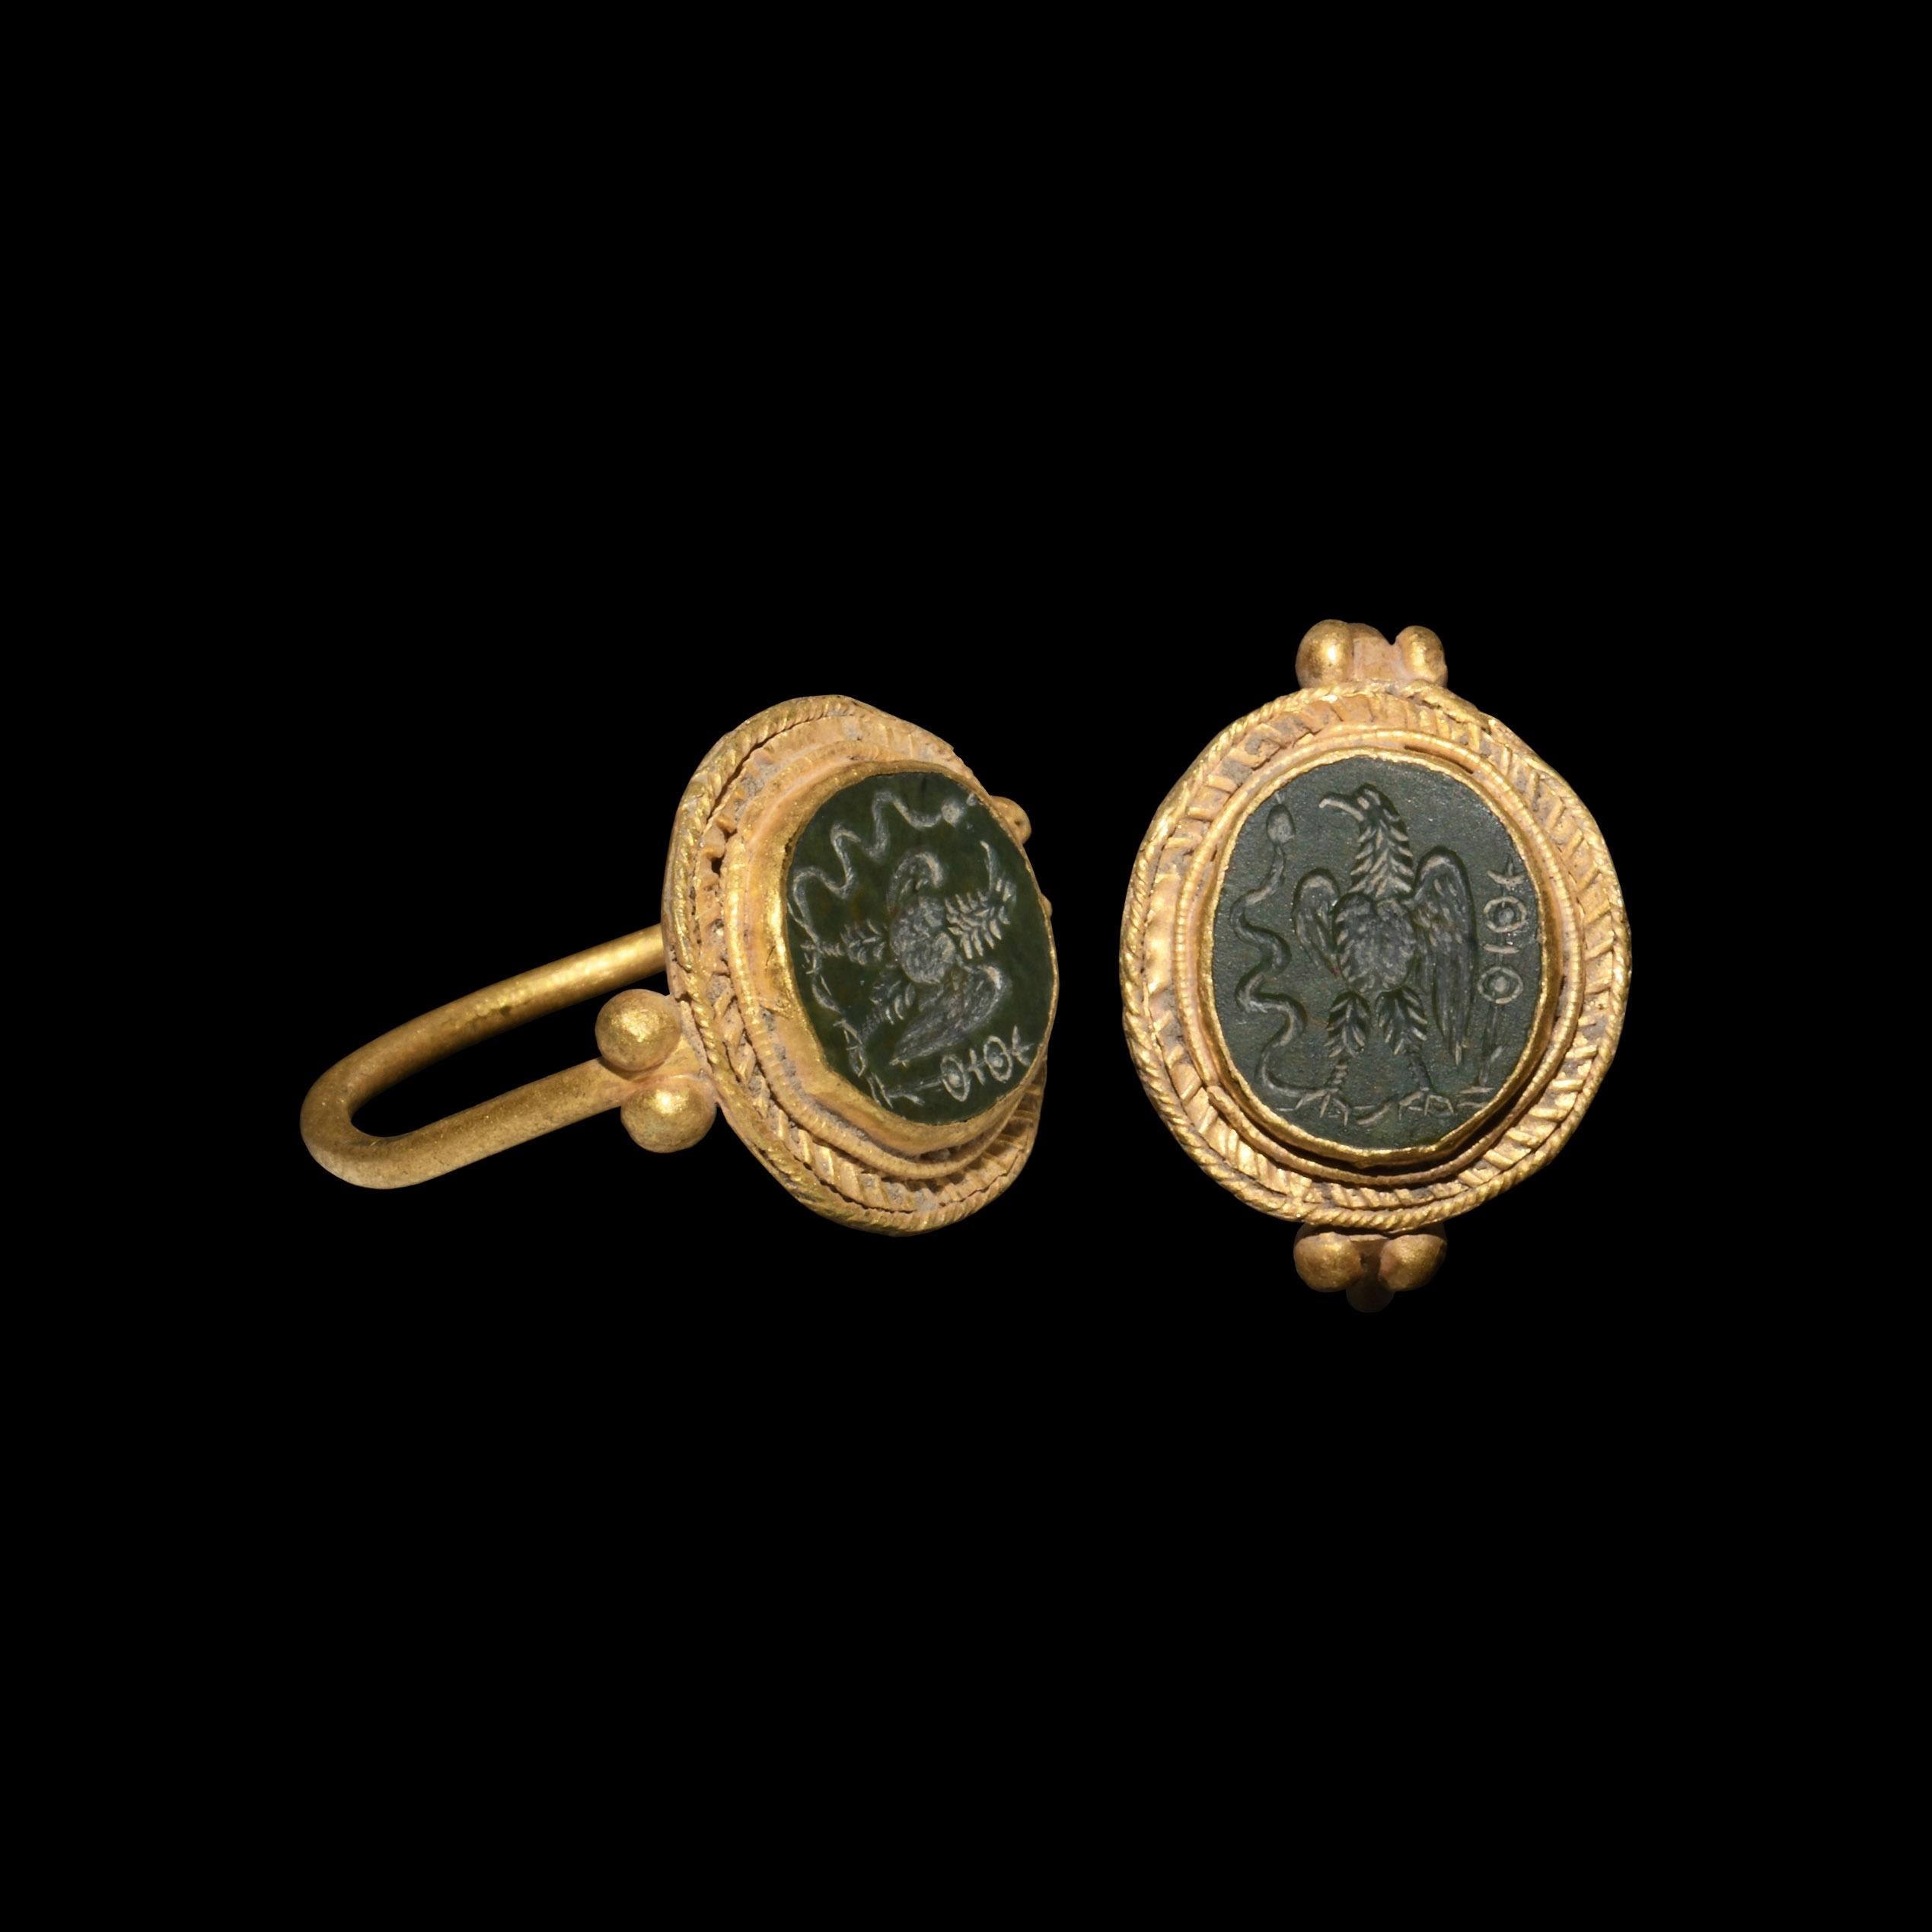 Hand-Crafted Roman Gold Ring with Eagle Gemstone, 4th Century AD